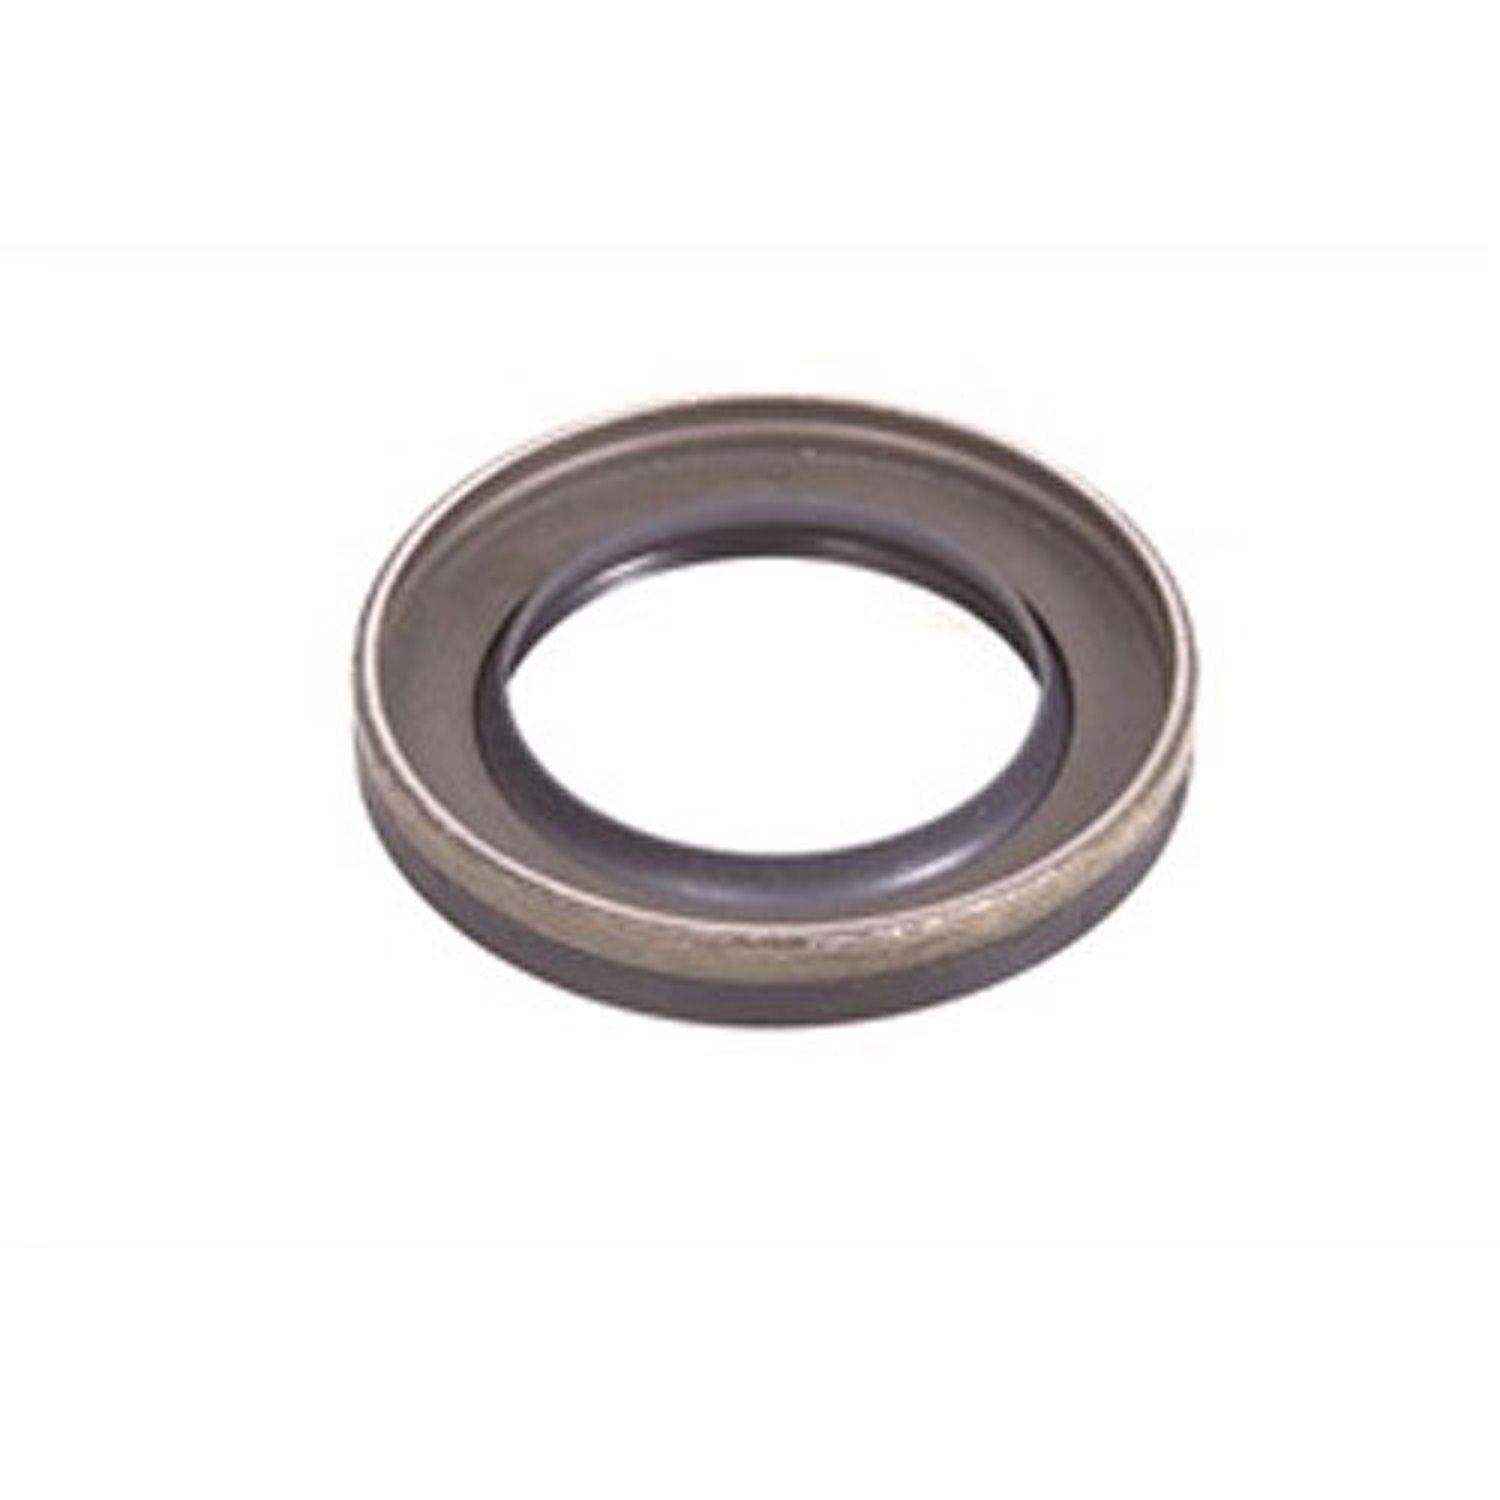 This crankshaft oil seal from Omix-ADA fits the 5.7L and 6.1L engine in 05-10 Jeep Grand Cherokees.